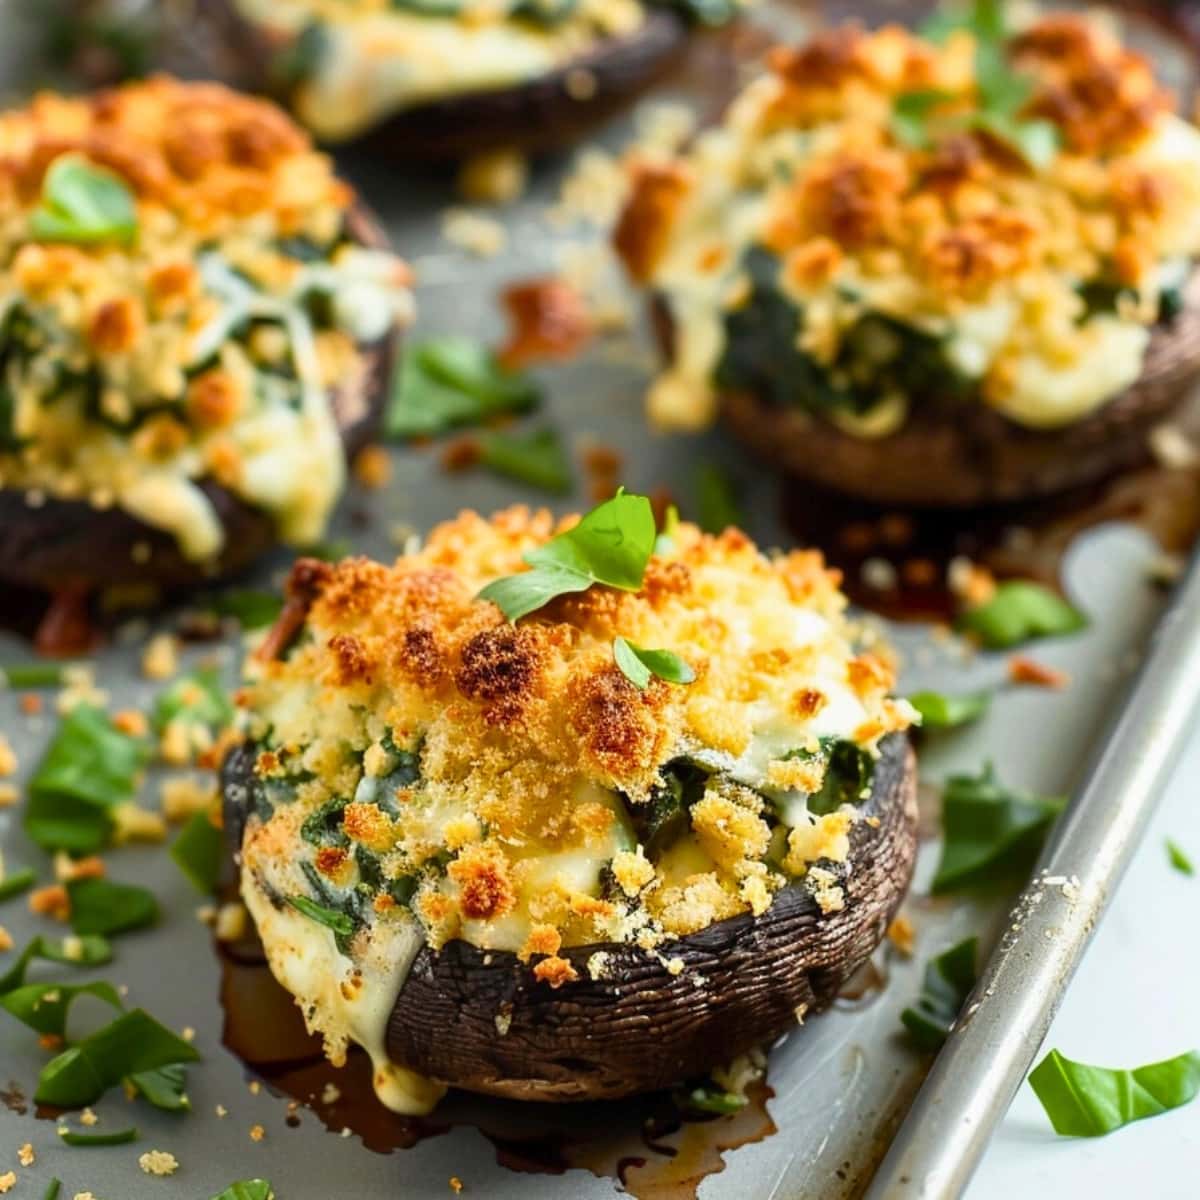 Stuffed Portobello Mushrooms in a baking sheet garnished with chopped parsley leaves.